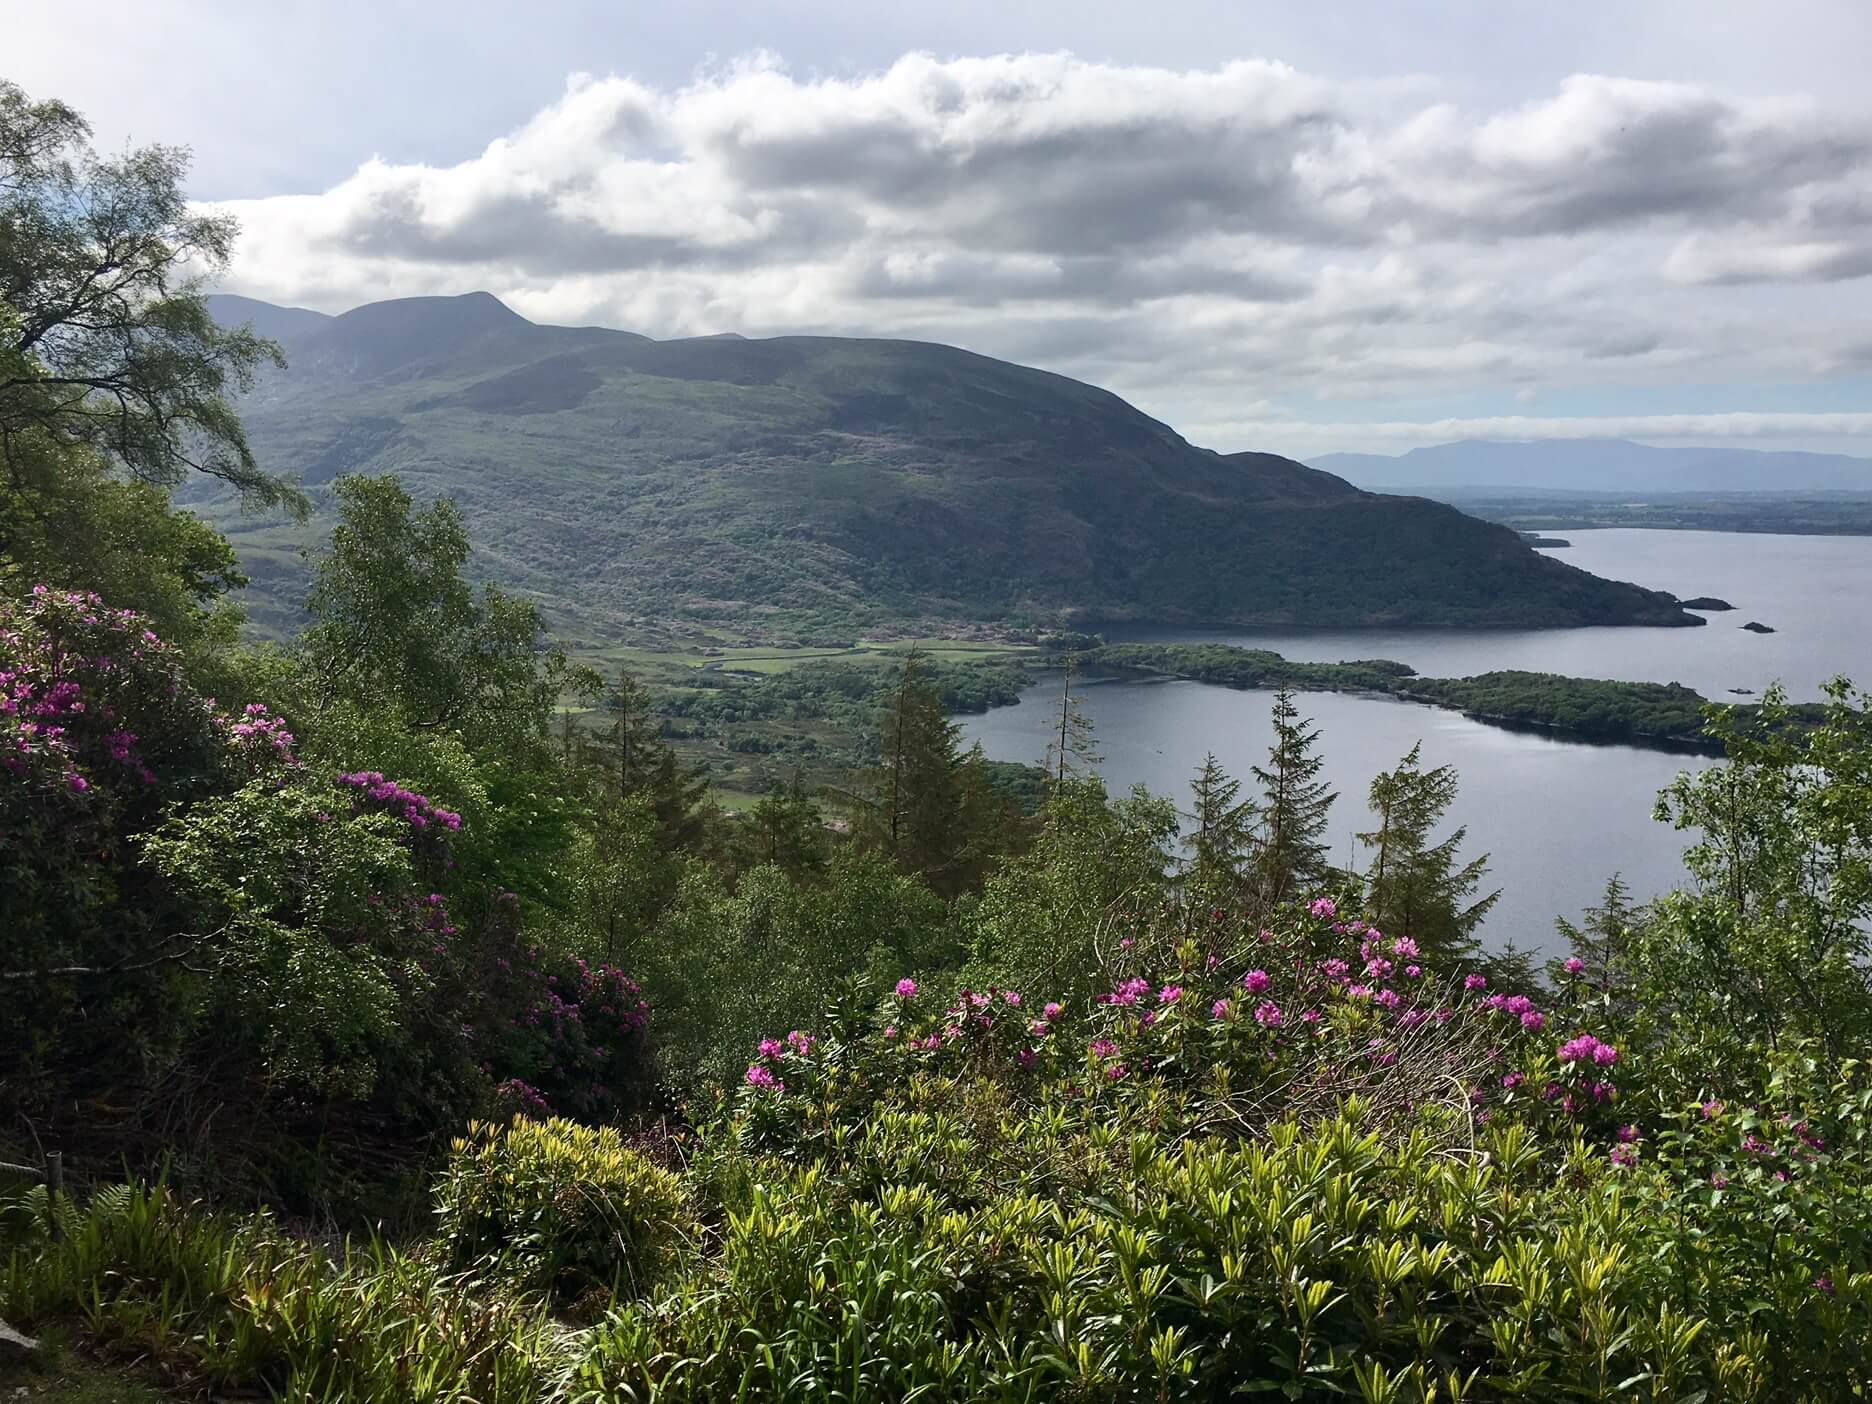 View from Torc Mountain in Killarney National Park, Ireland